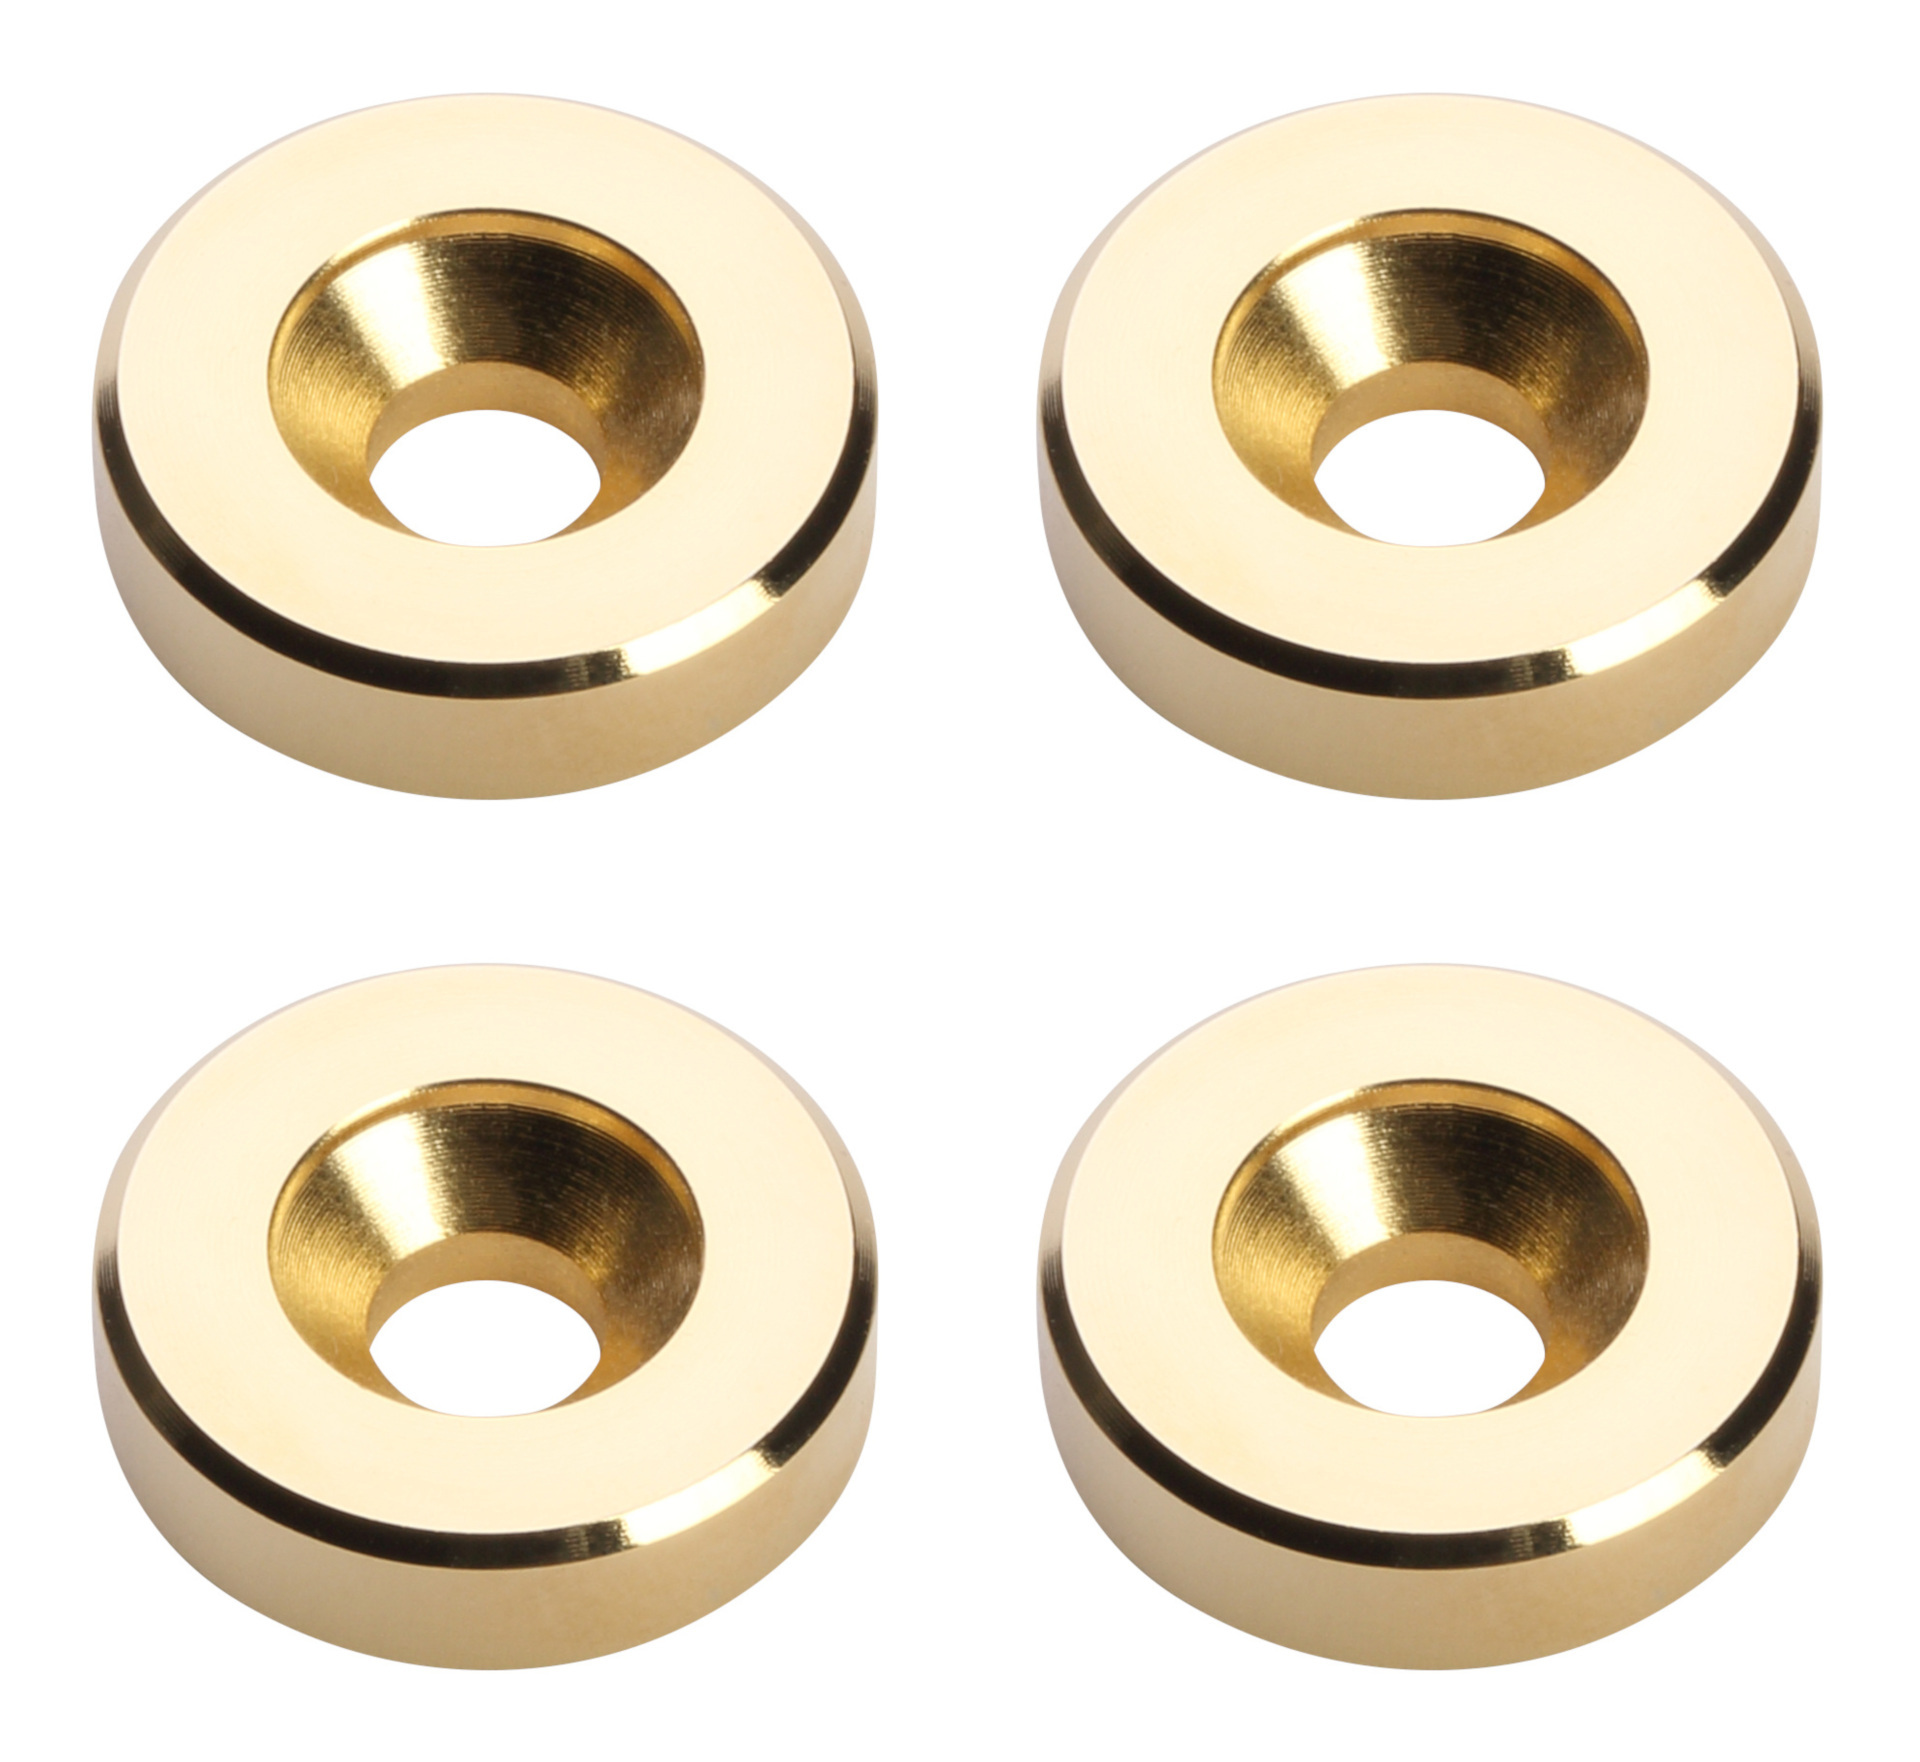 Sadowsky Parts - Bushing for Bolt-on Necks - 4 mm - Gold - 4 Pieces